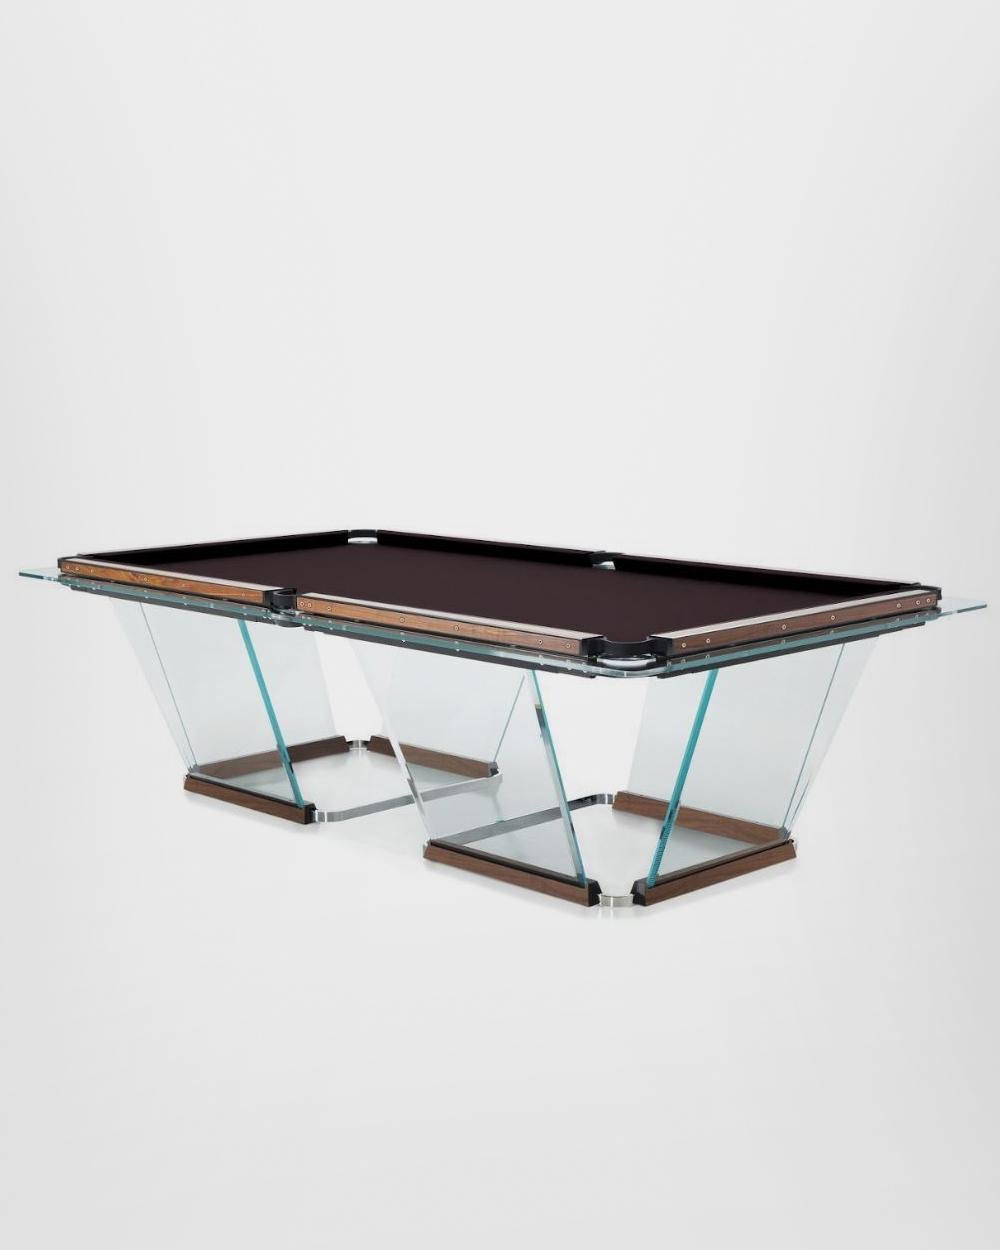 Contemporary Teckell T1.3 Crystal 9-foot Pool Table in Leather by Marc Sadler For Sale